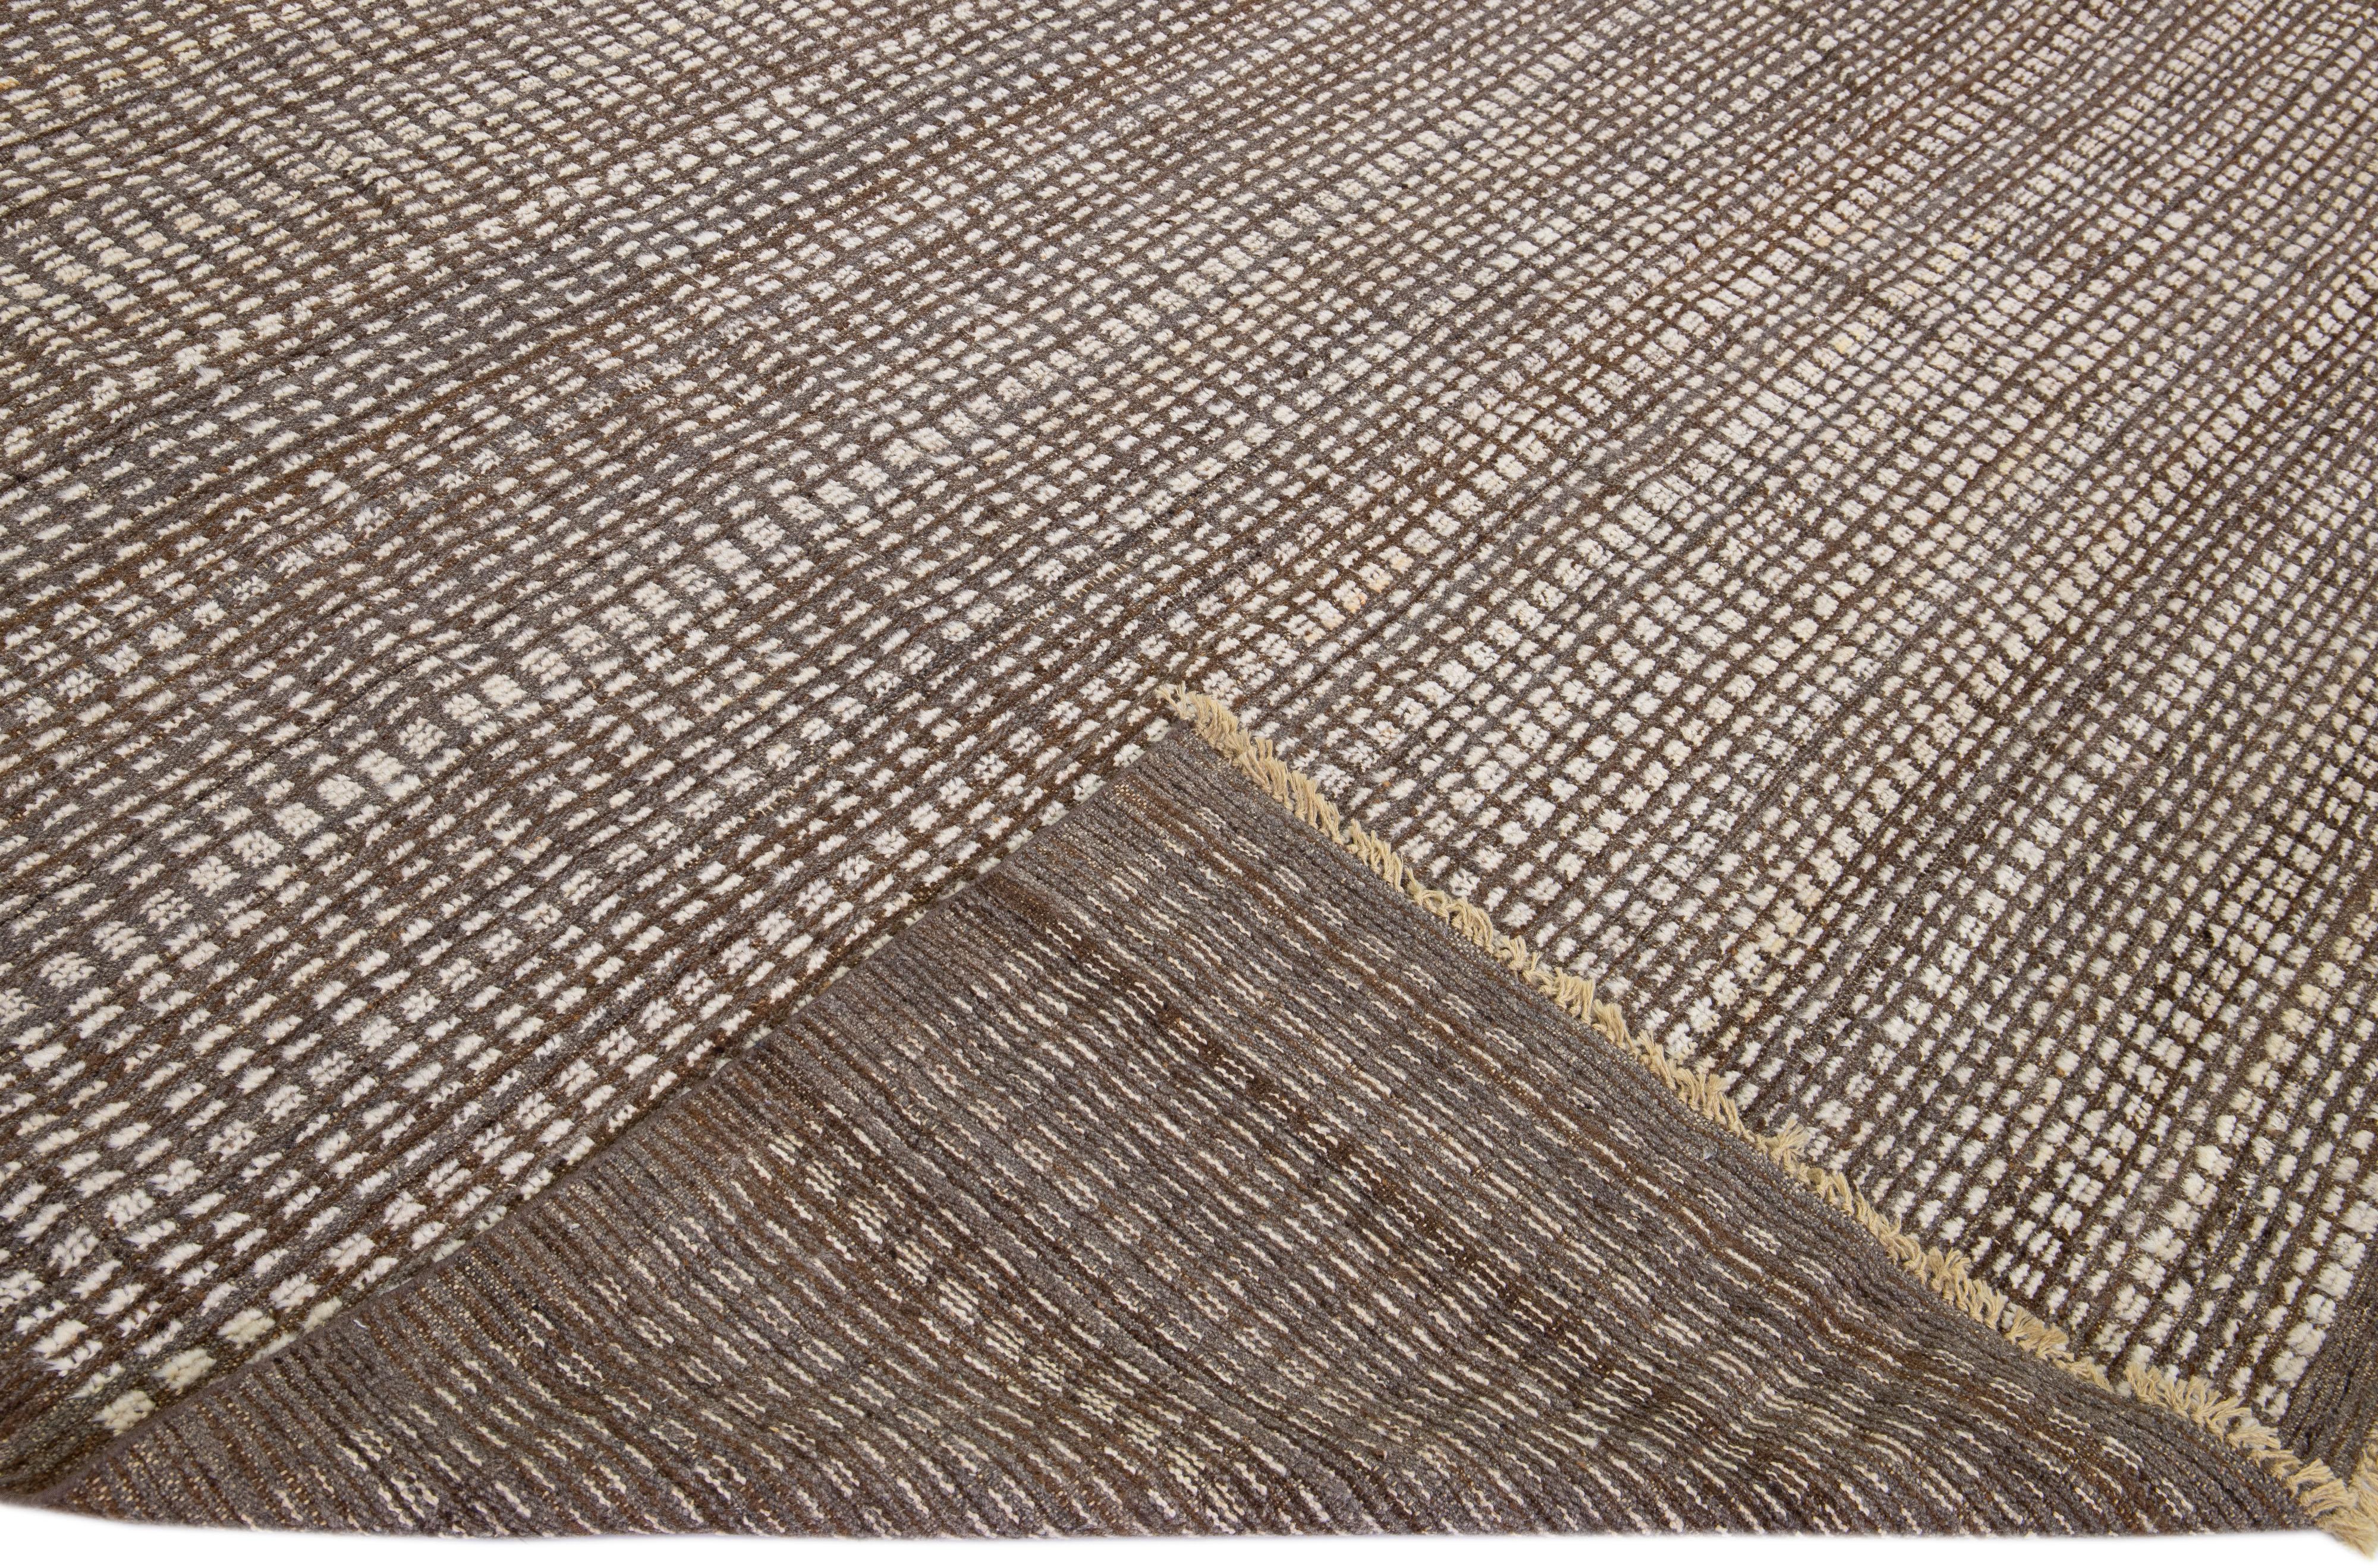 Beautiful modern Moroccan style hand-knotted wool rug with a brown field. This piece has a gorgeous beige subtle geometric pattern design with fringes on the top and bottom end.

This rug measures: 9'5